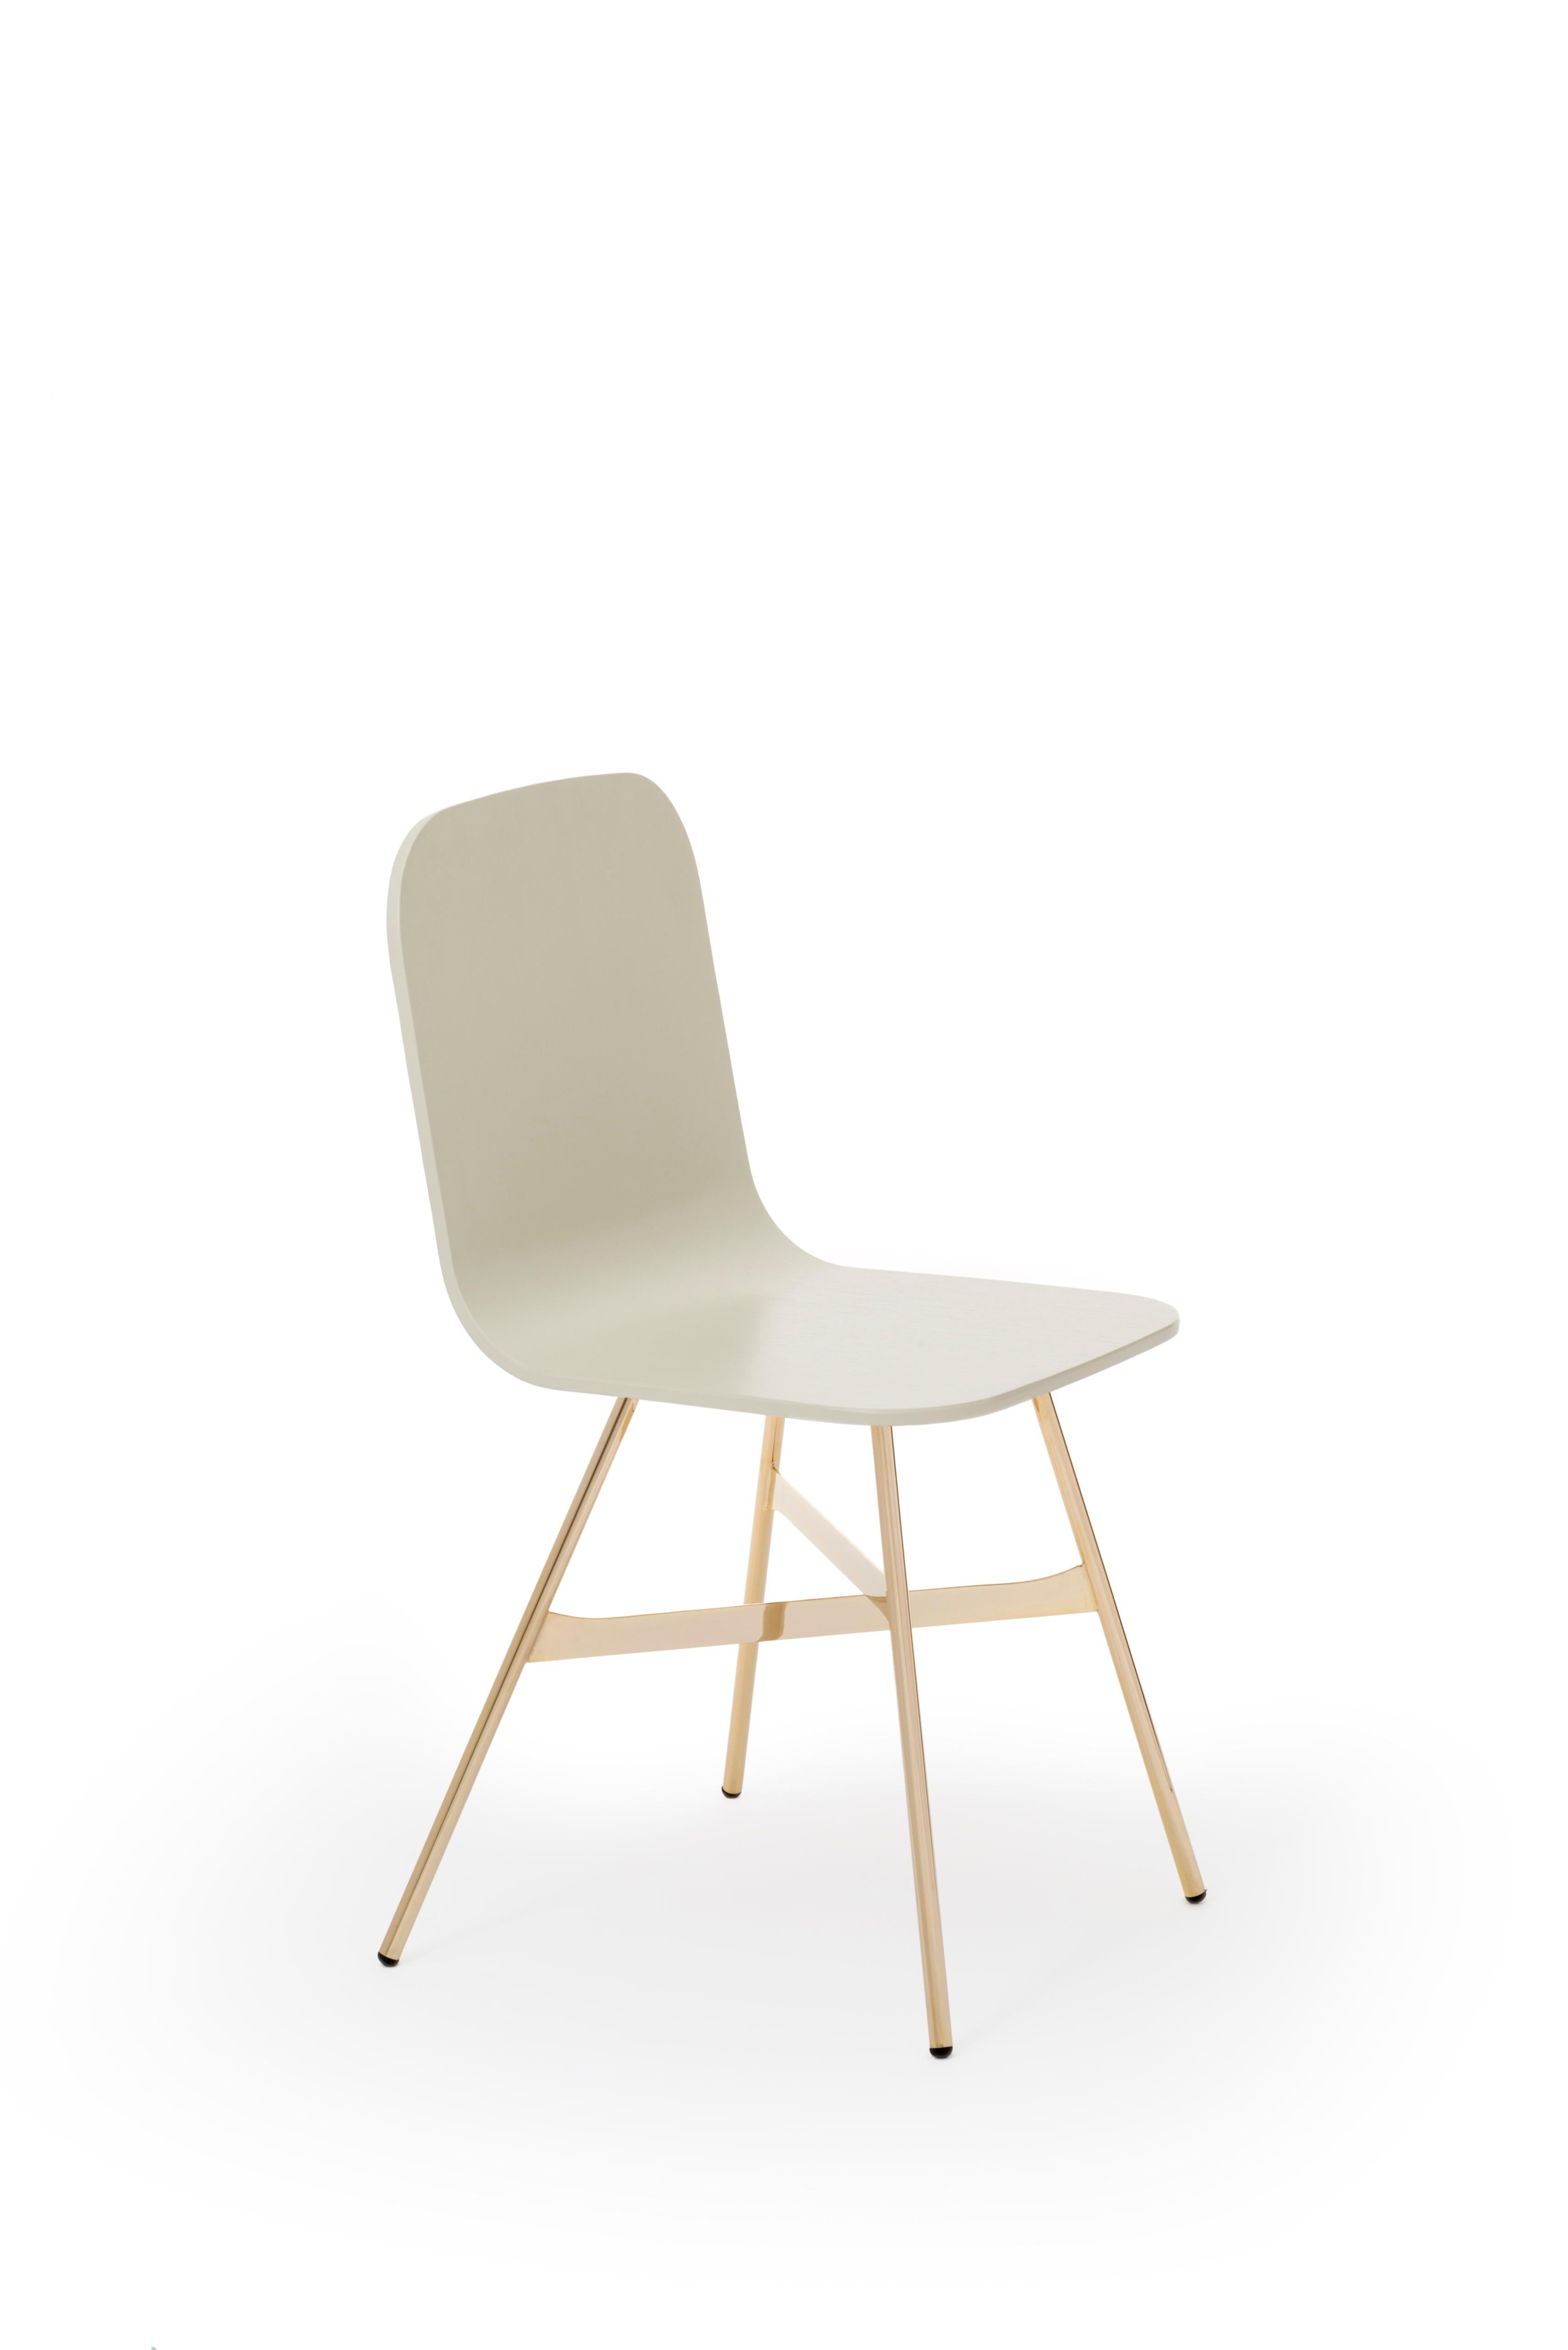 Tria Chair, Black Plywood Shell, Golden Legs, Minimalist Icon Made in italy For Sale 2